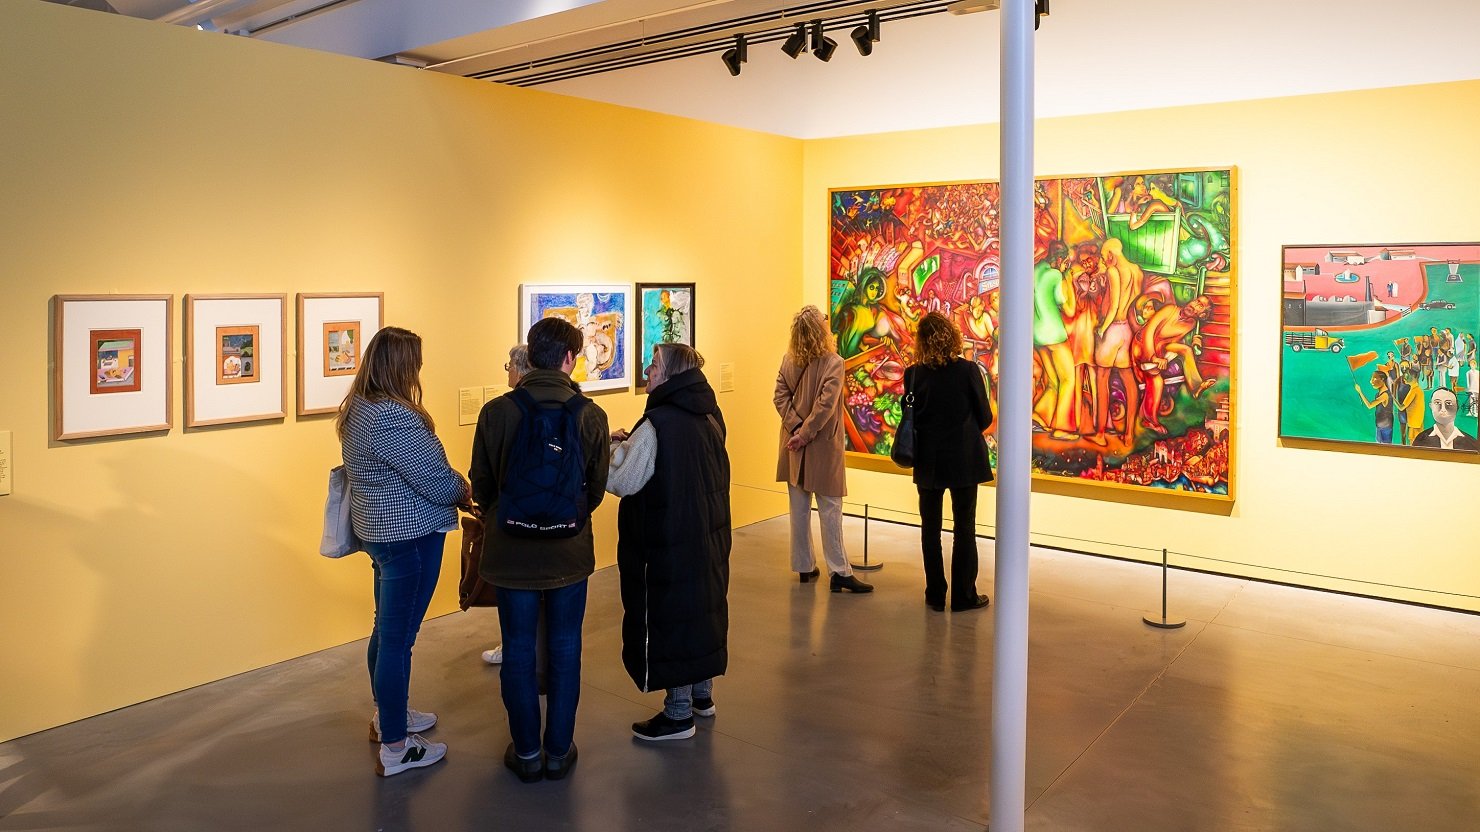 A small group of people look at an art exhibition in a gallery